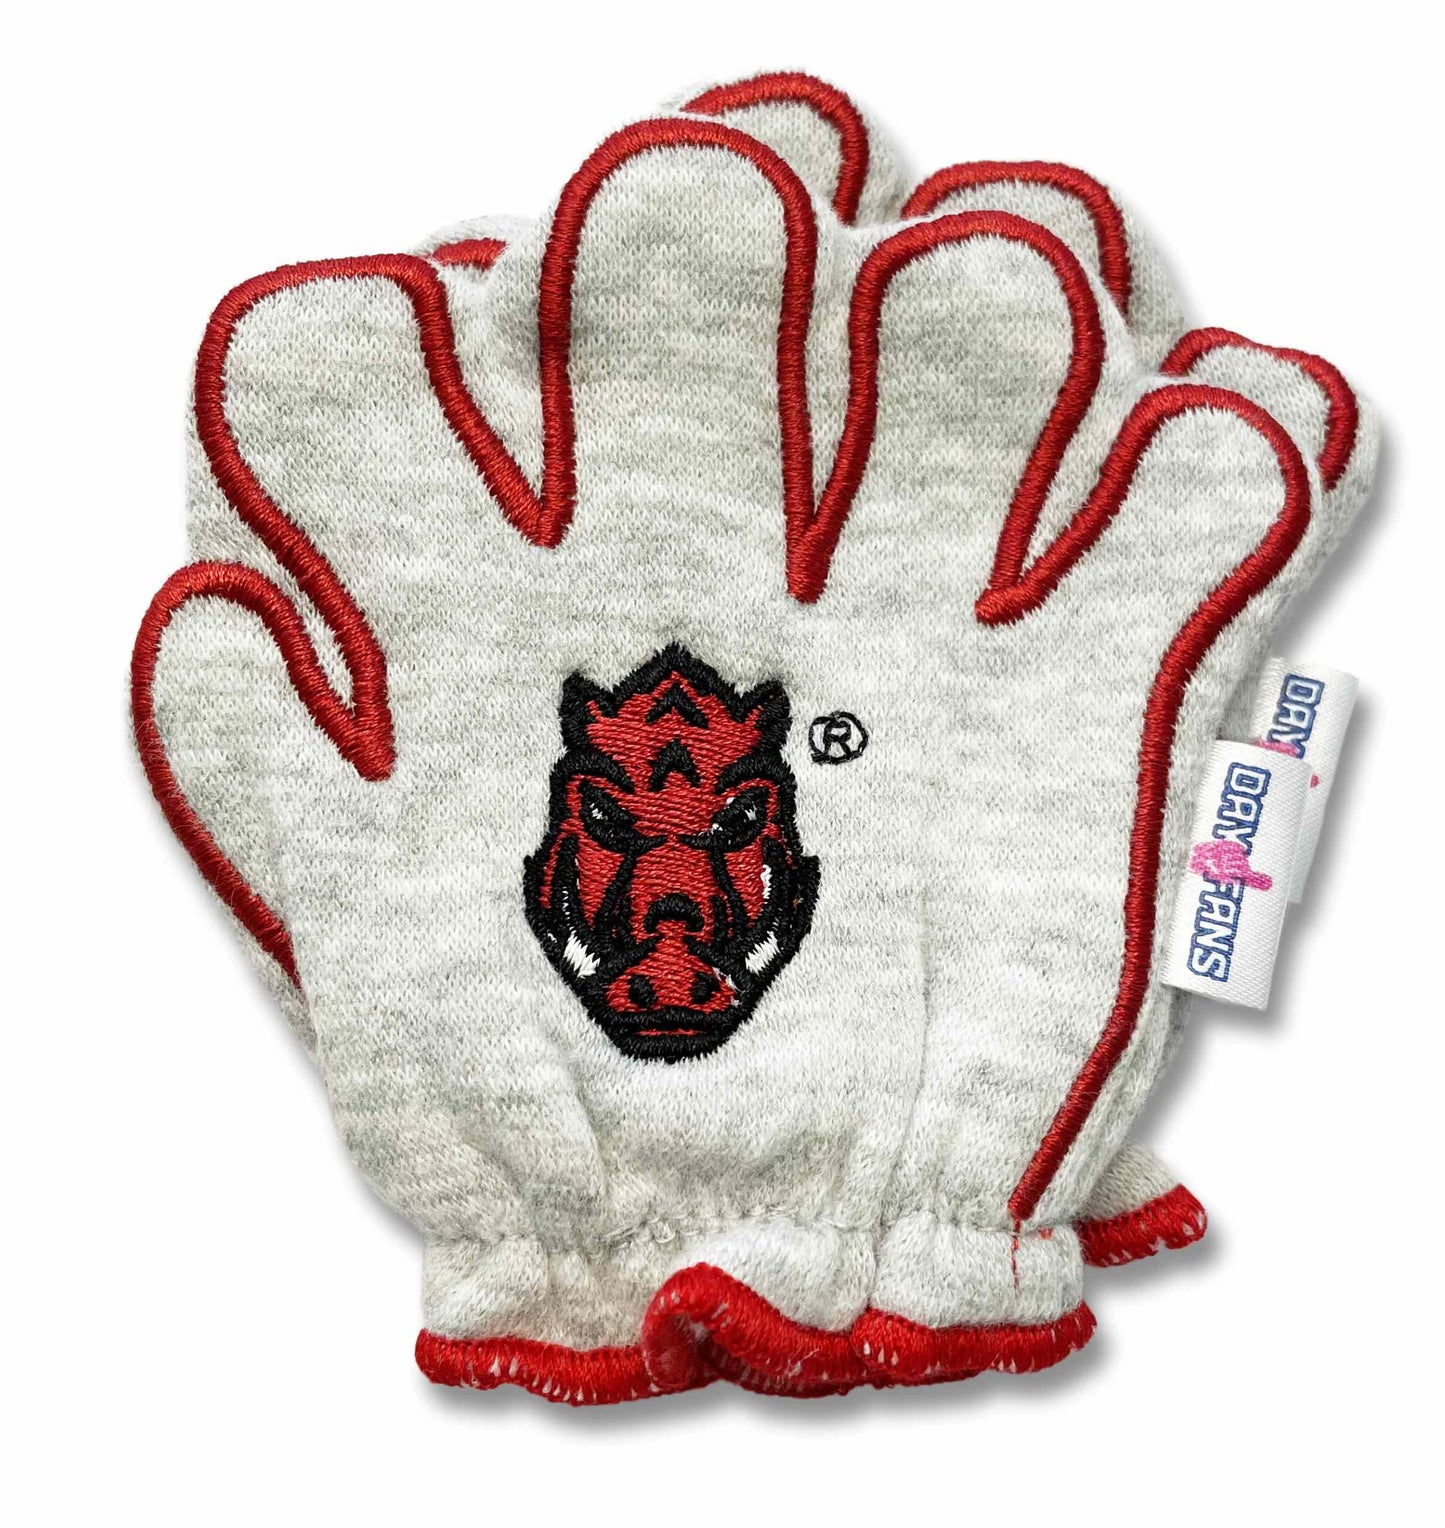 Arkansas Wooo Pig FanMitts Baby Mittens Heathered Gray Back Pair Stacked